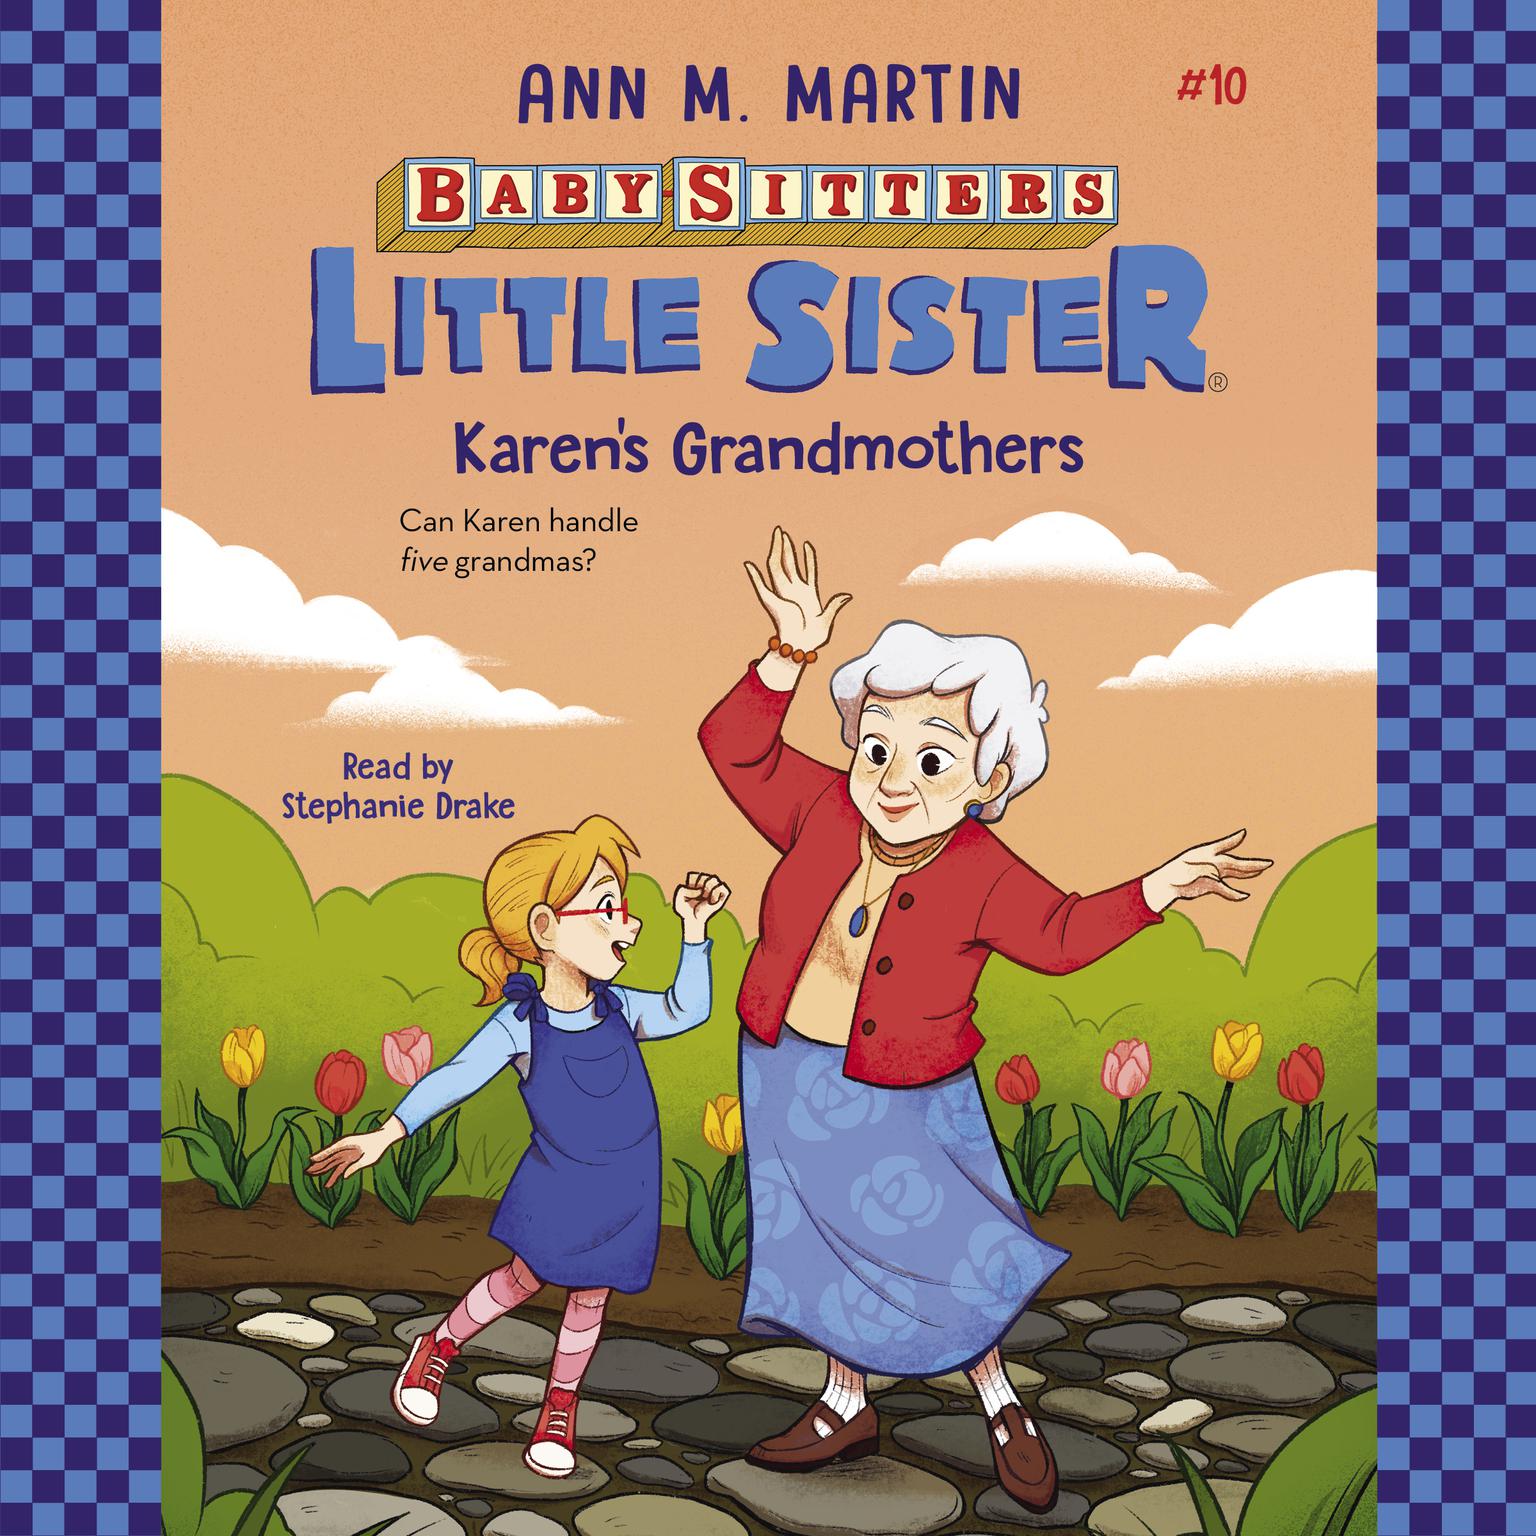 Karens Grandmothers (Baby-sitters Little Sister #10) Audiobook, by Ann M. Martin